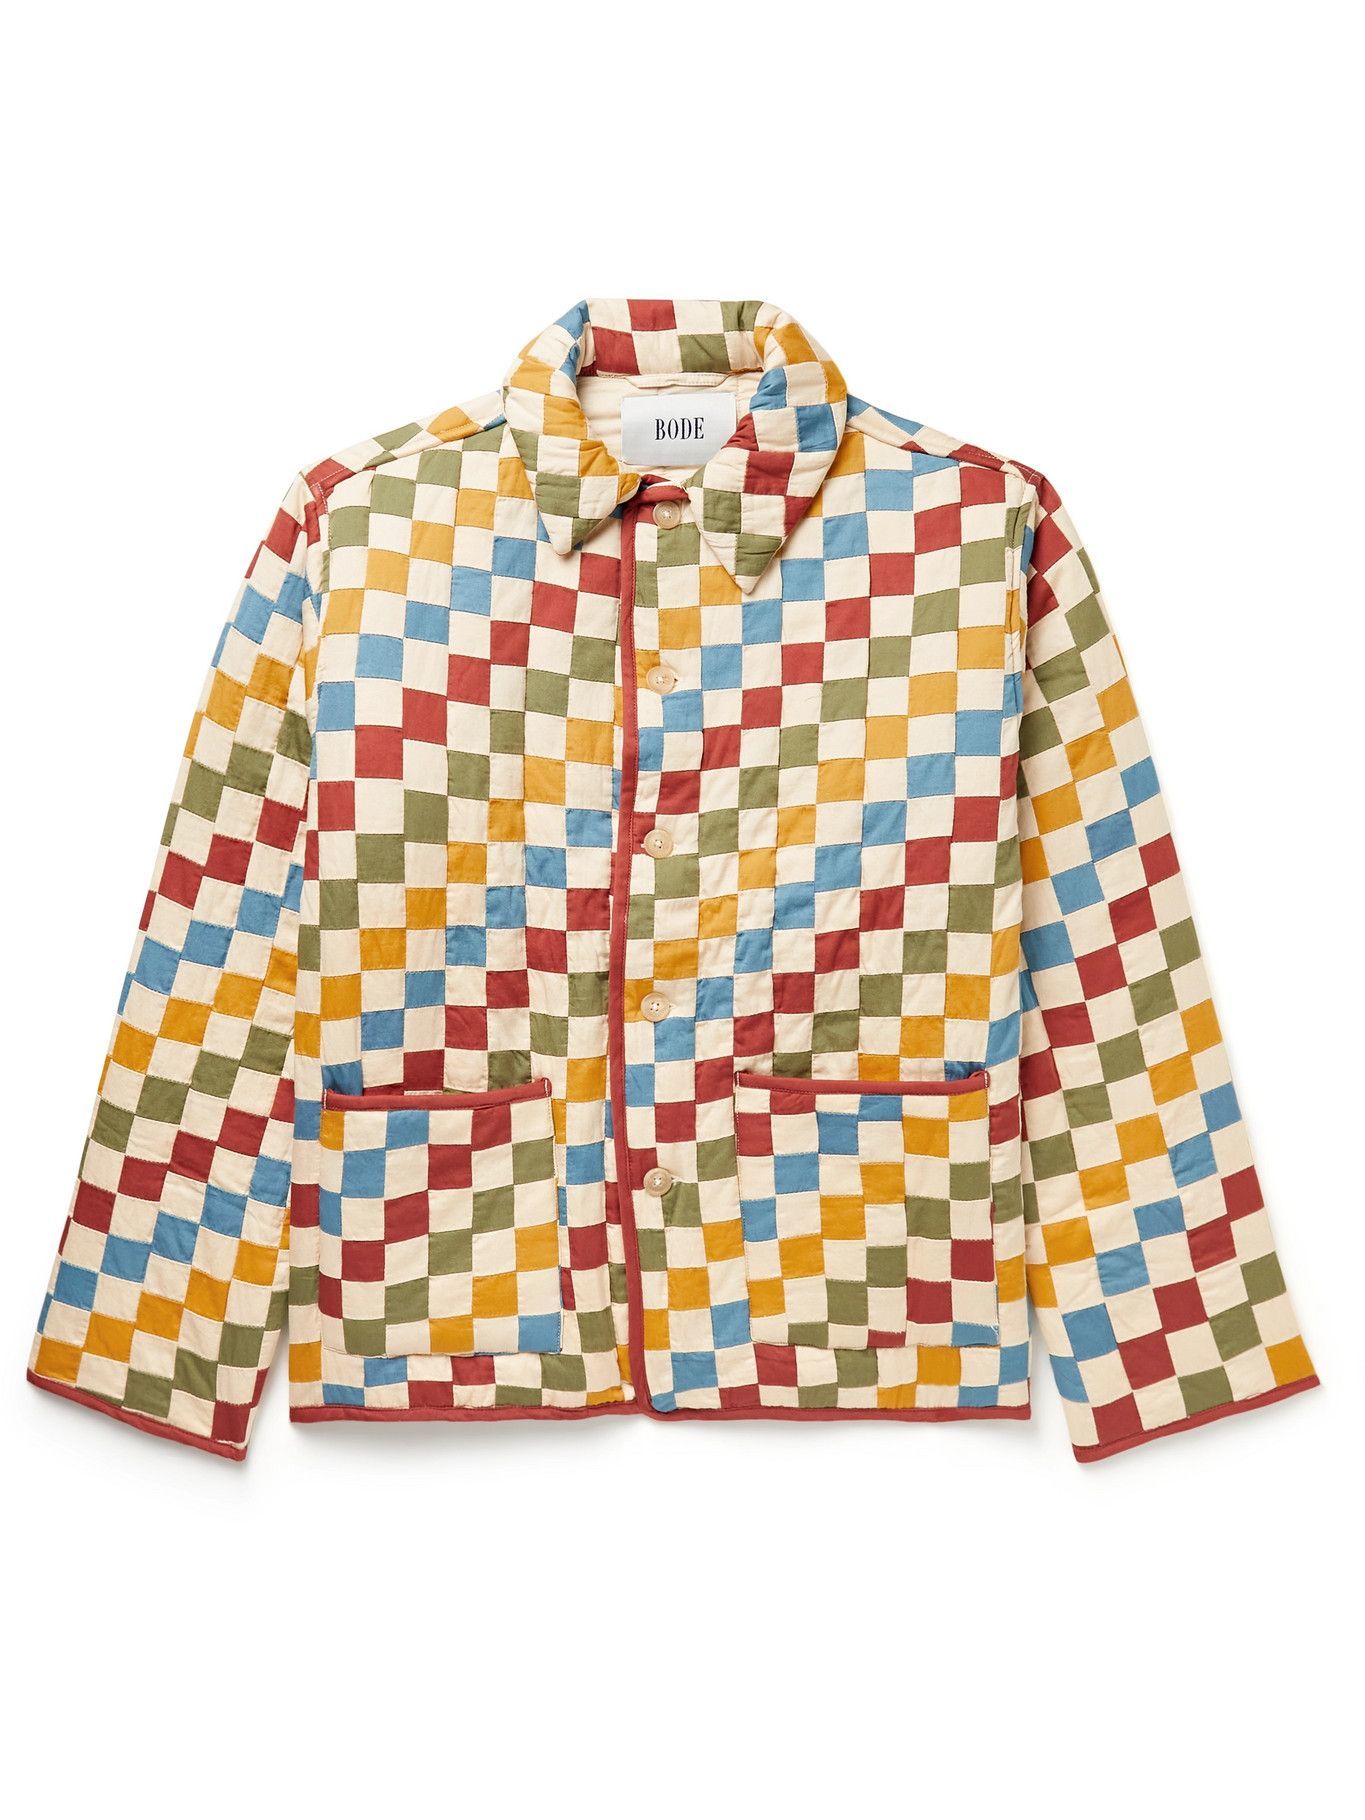 BODE - Stamp Checked Patchwork Cotton Chore Jacket - Multi Bode